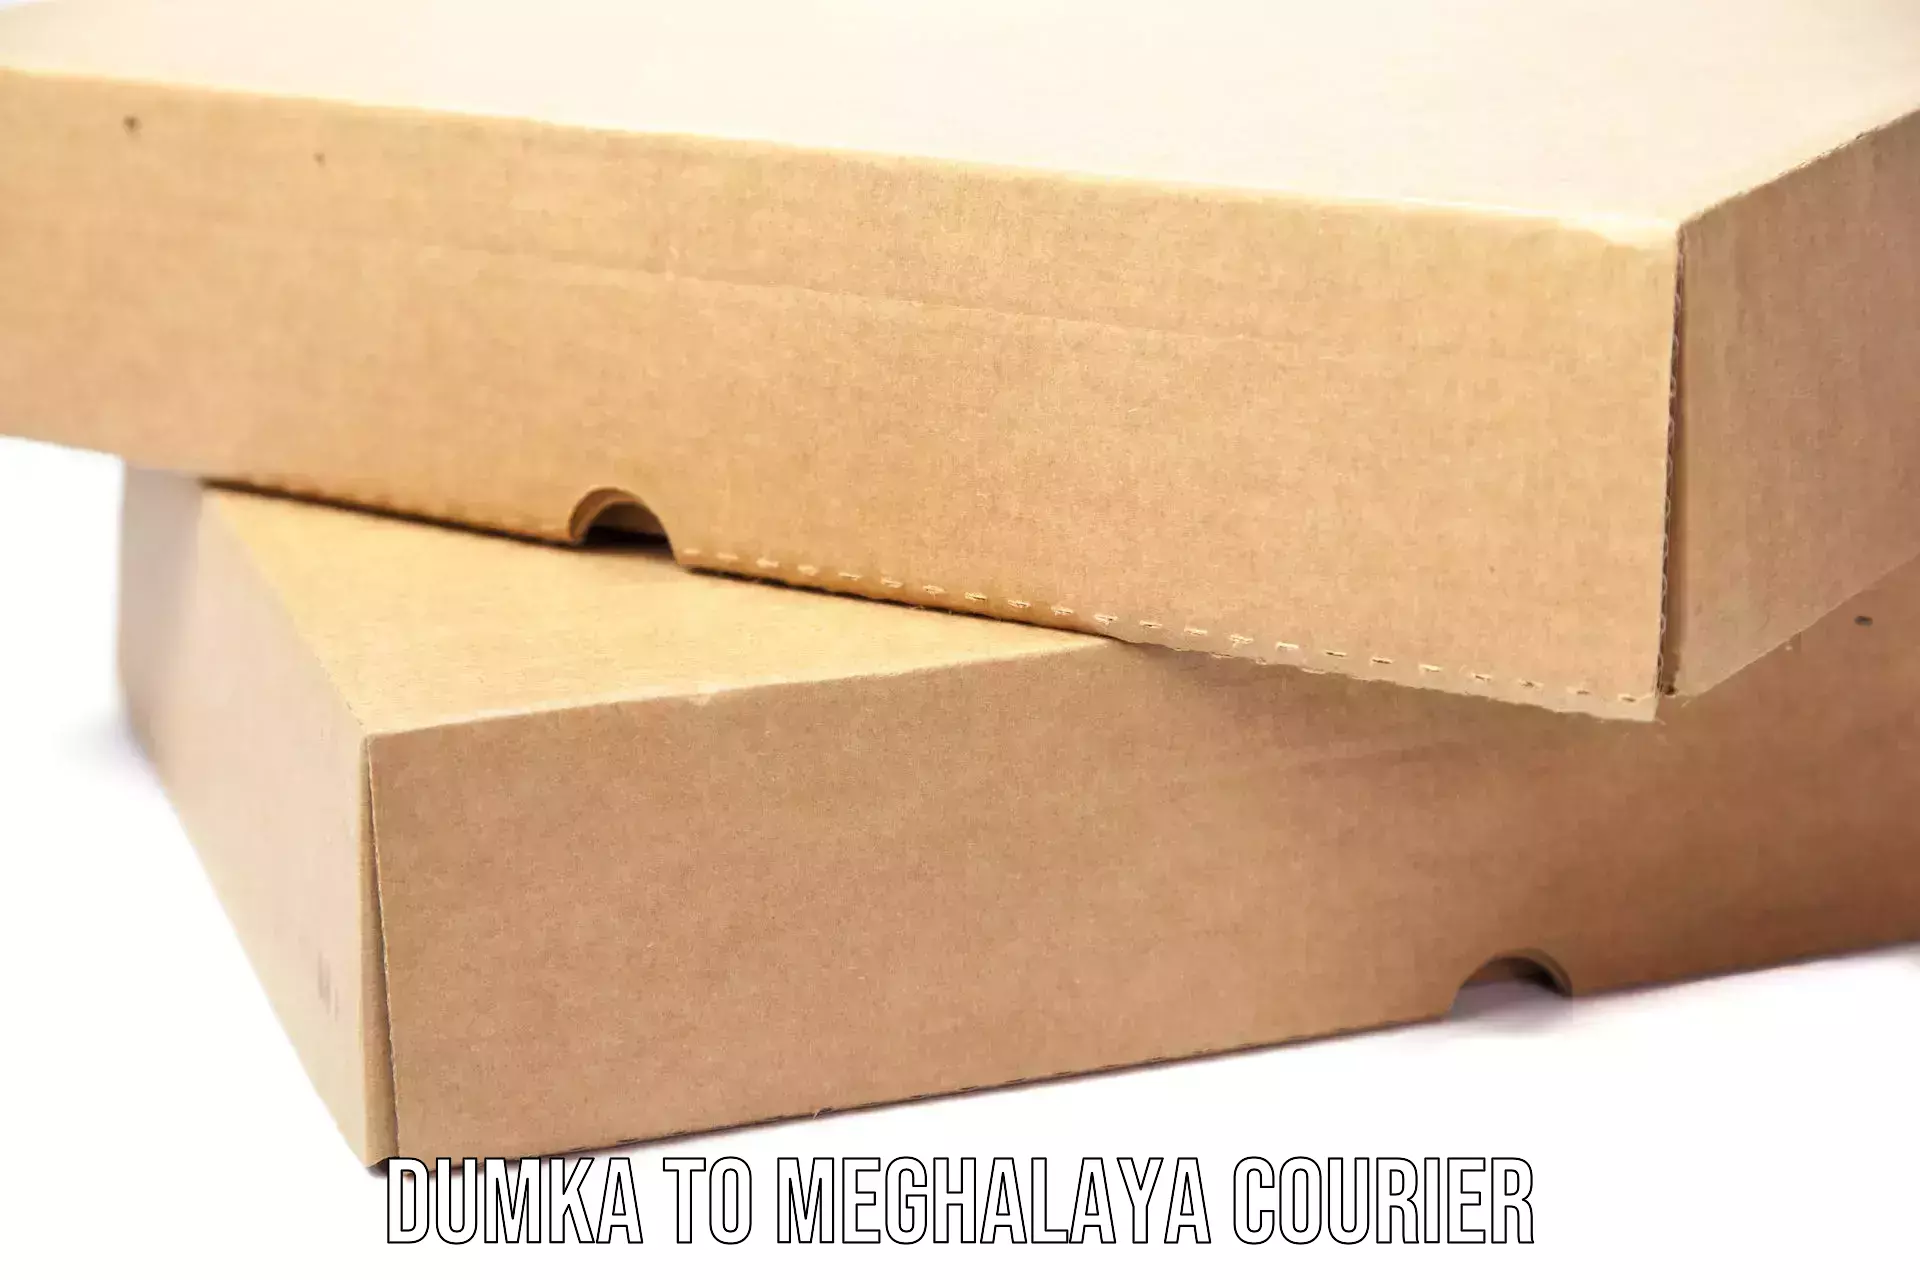 State-of-the-art courier technology Dumka to Meghalaya